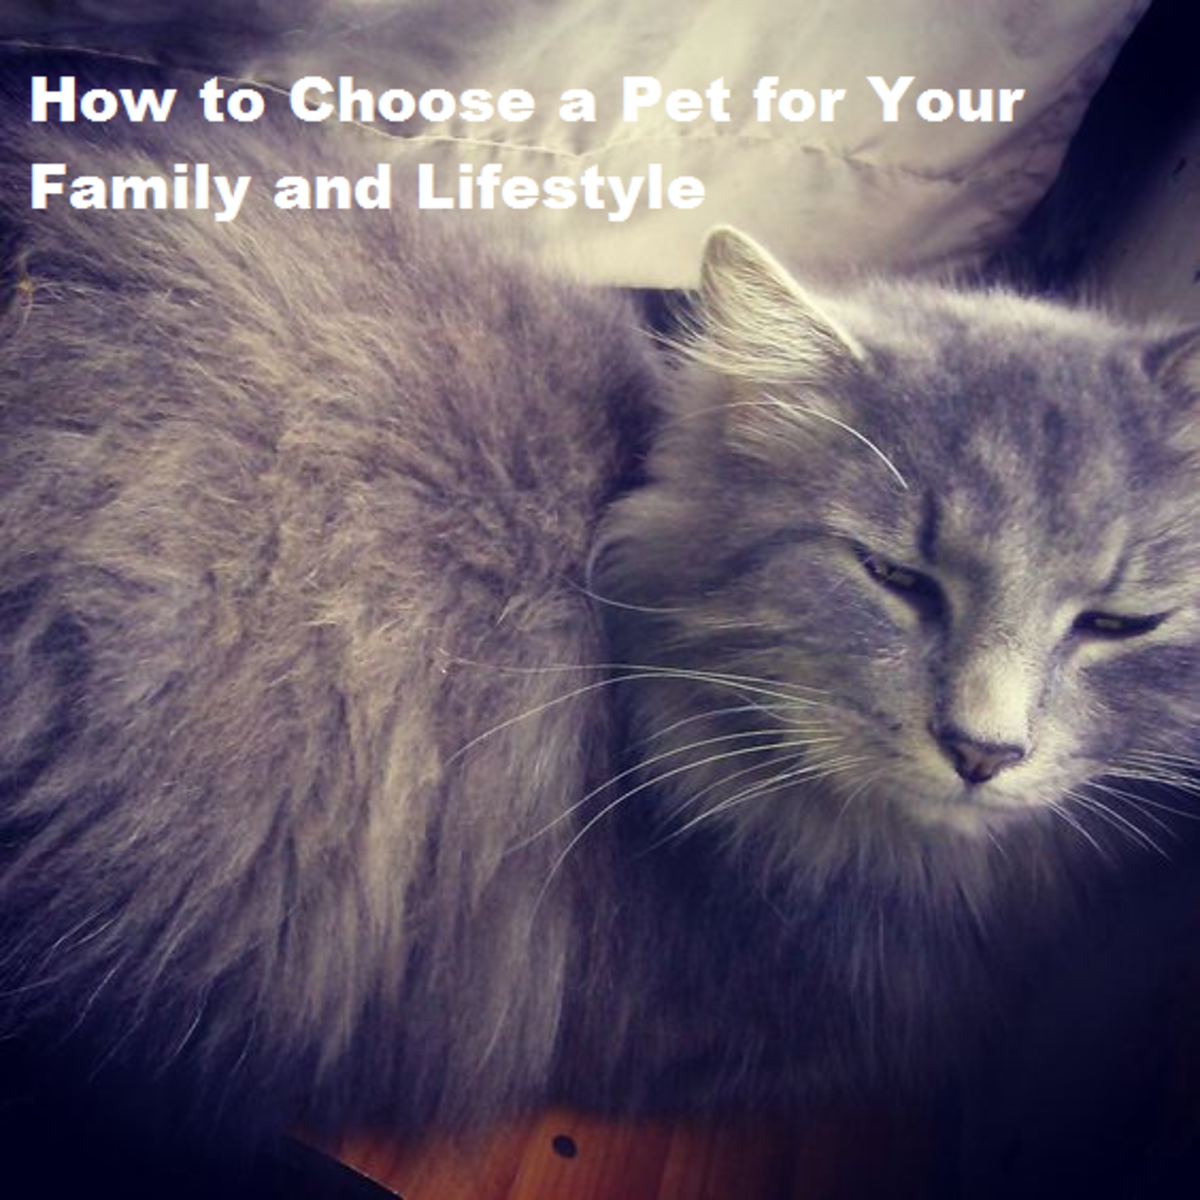 How to Choose a Pet for Your Family and Lifestyle